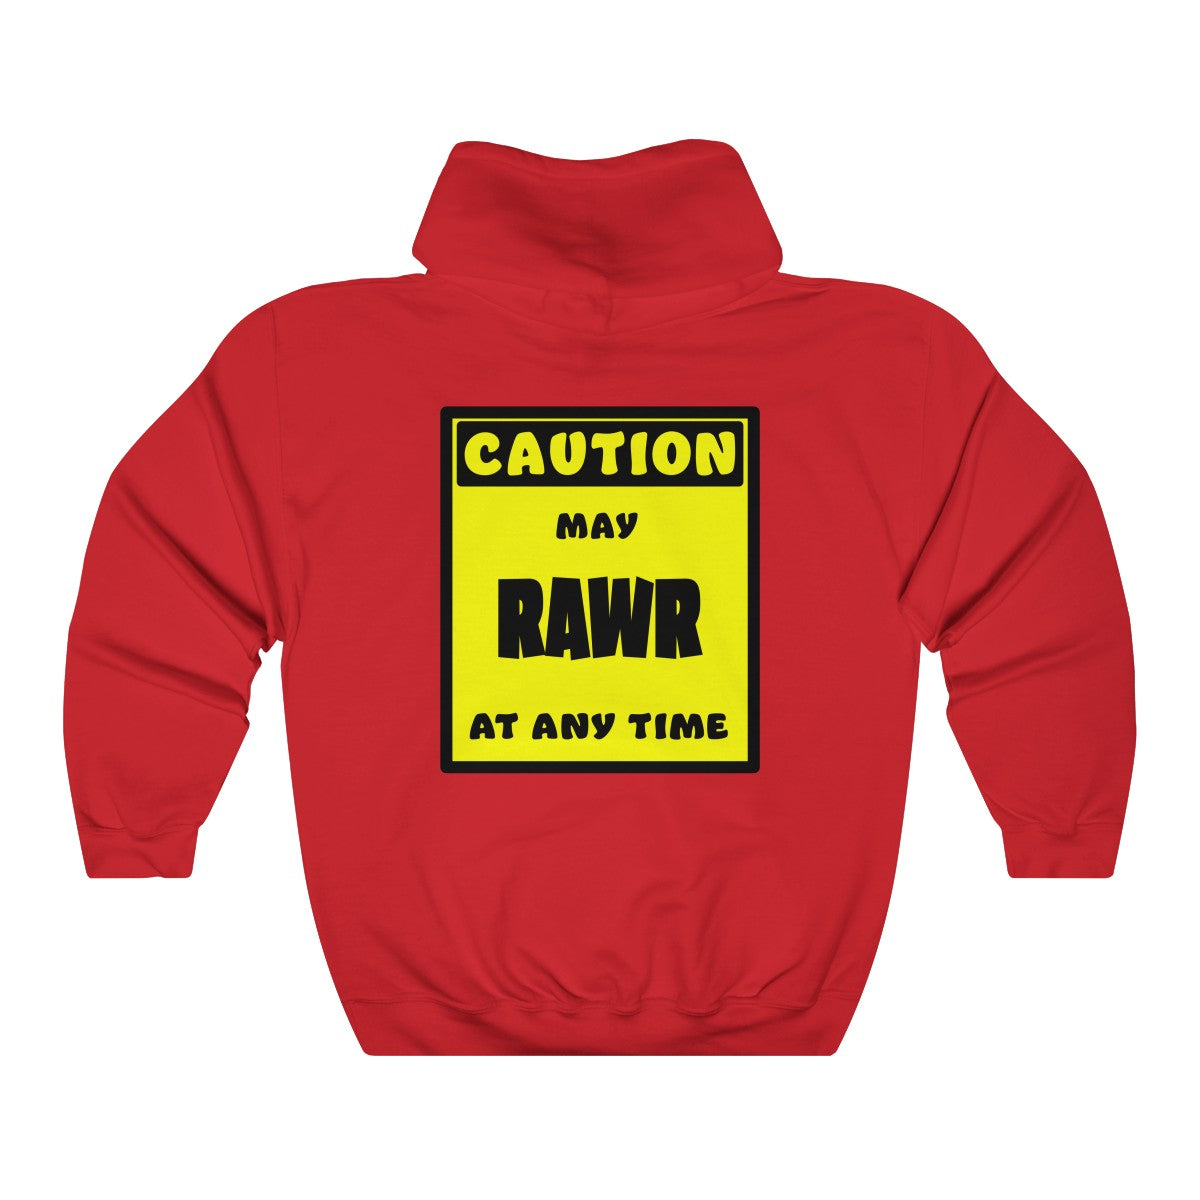 CAUTION! May RAWR at any time! - Hoodie Hoodie AFLT-Whootorca Red S 